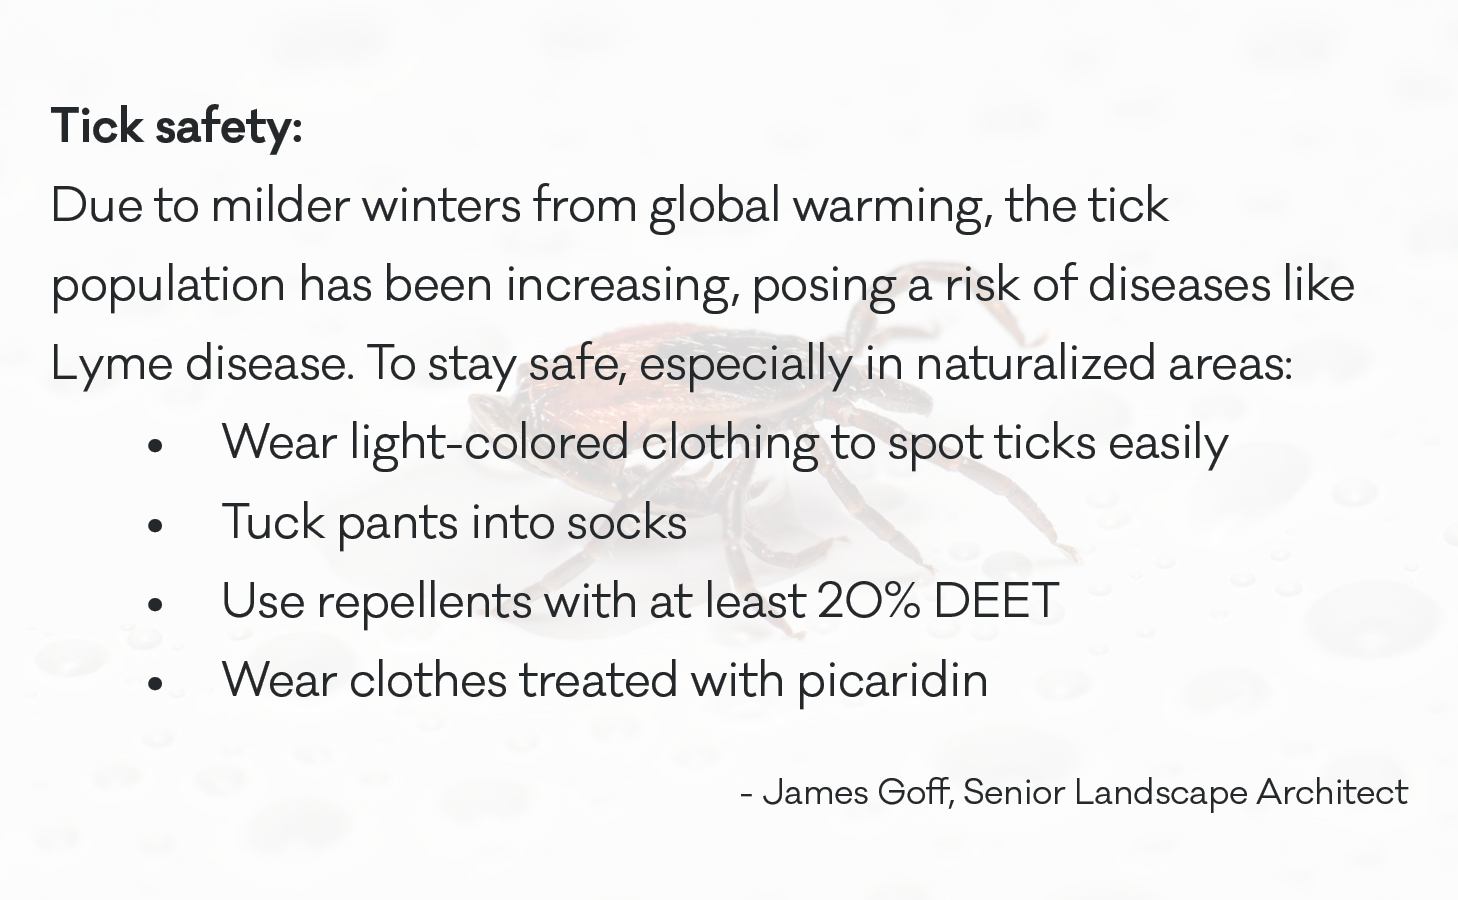 Due to milder winters from global warming, the tick population has been increasing, posing a risk of diseases like Lyme disease. To stay safe, especially in naturalized areas: Wear light-colored clothing to spot ticks easily, tuck pants into socks, use repellents with at least 20% DEET, and wear clothes treated with picaridin